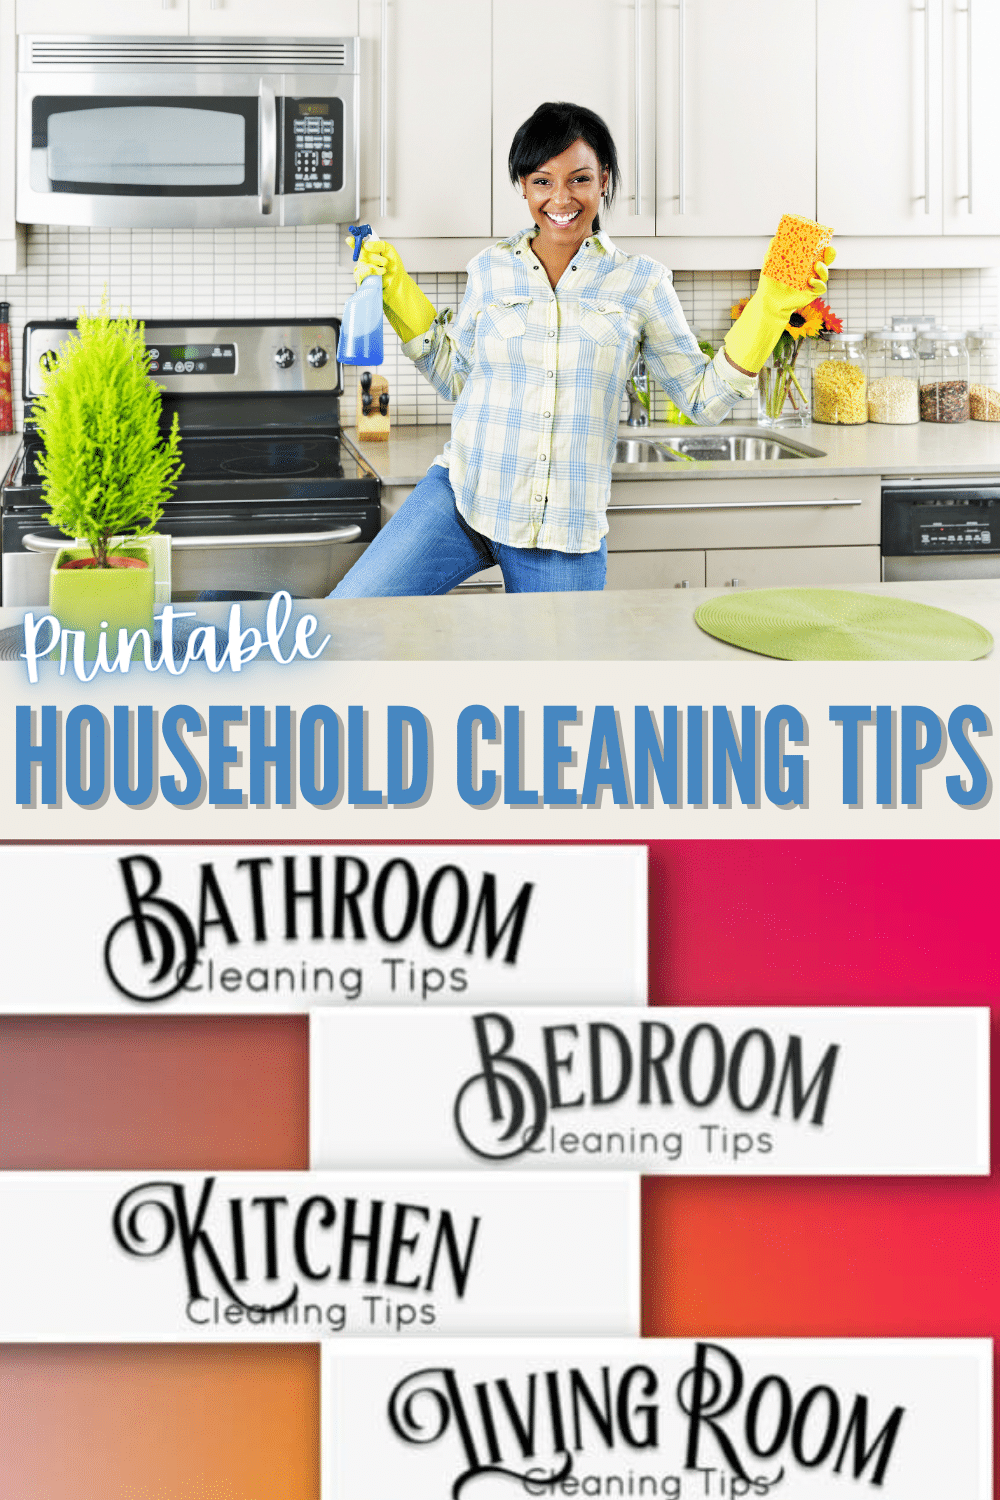 These printable household cleaning tips cover the bathroom, kitchen, bedroom and living room. Cleaning hacks to make the housework quick and easy each week. #printables #cleaningtips #housework via @wondermomwannab